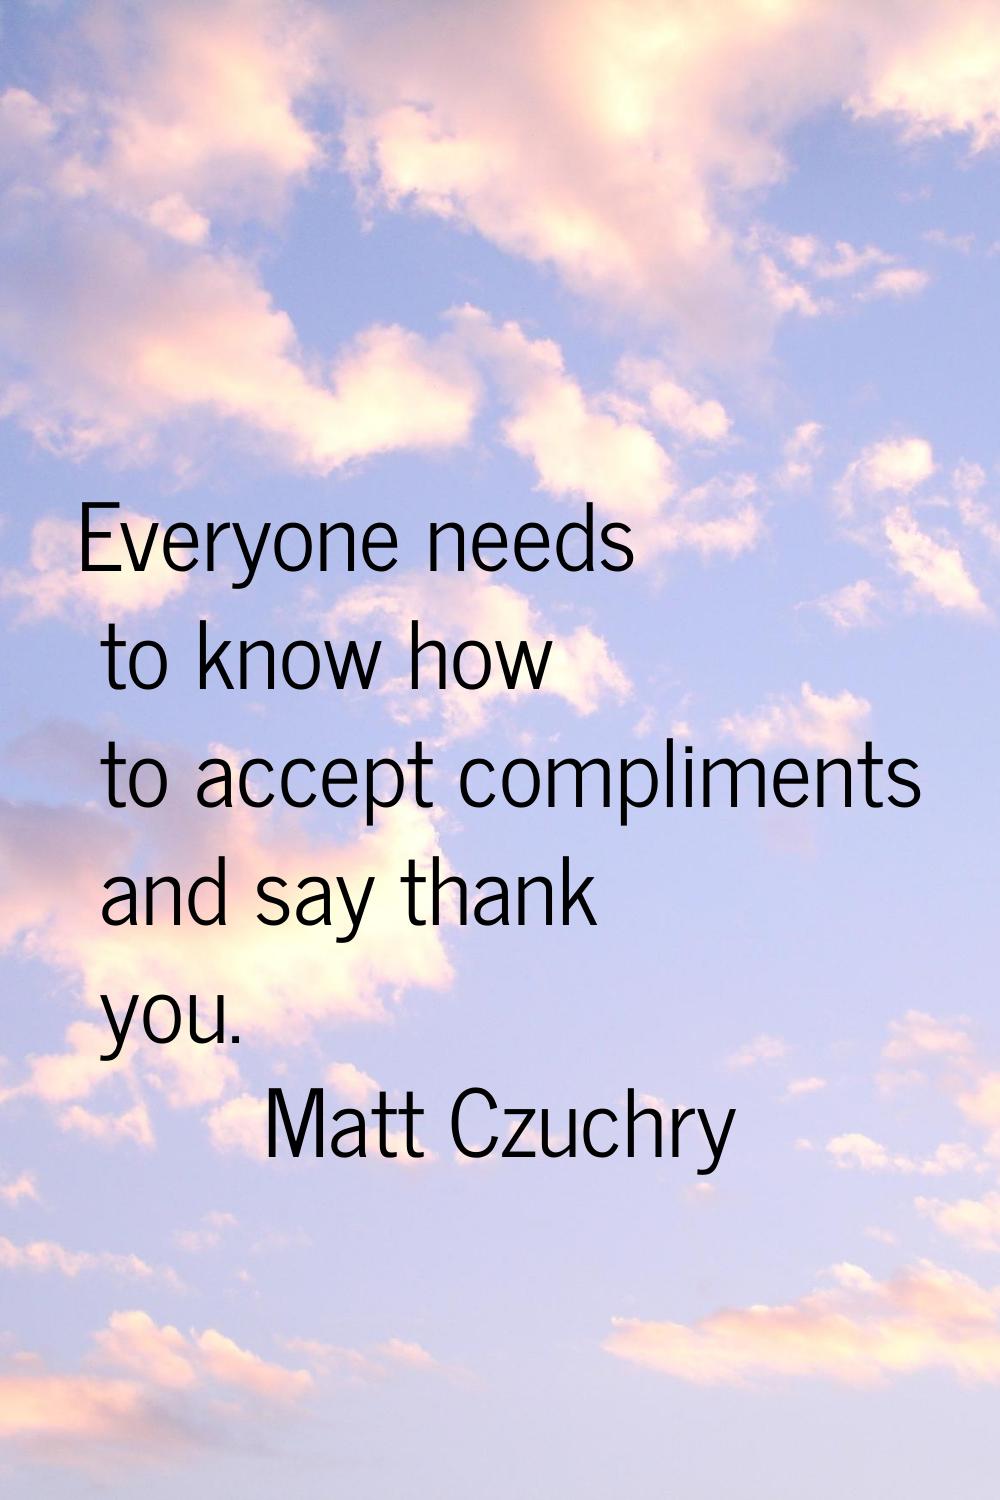 Everyone needs to know how to accept compliments and say thank you.